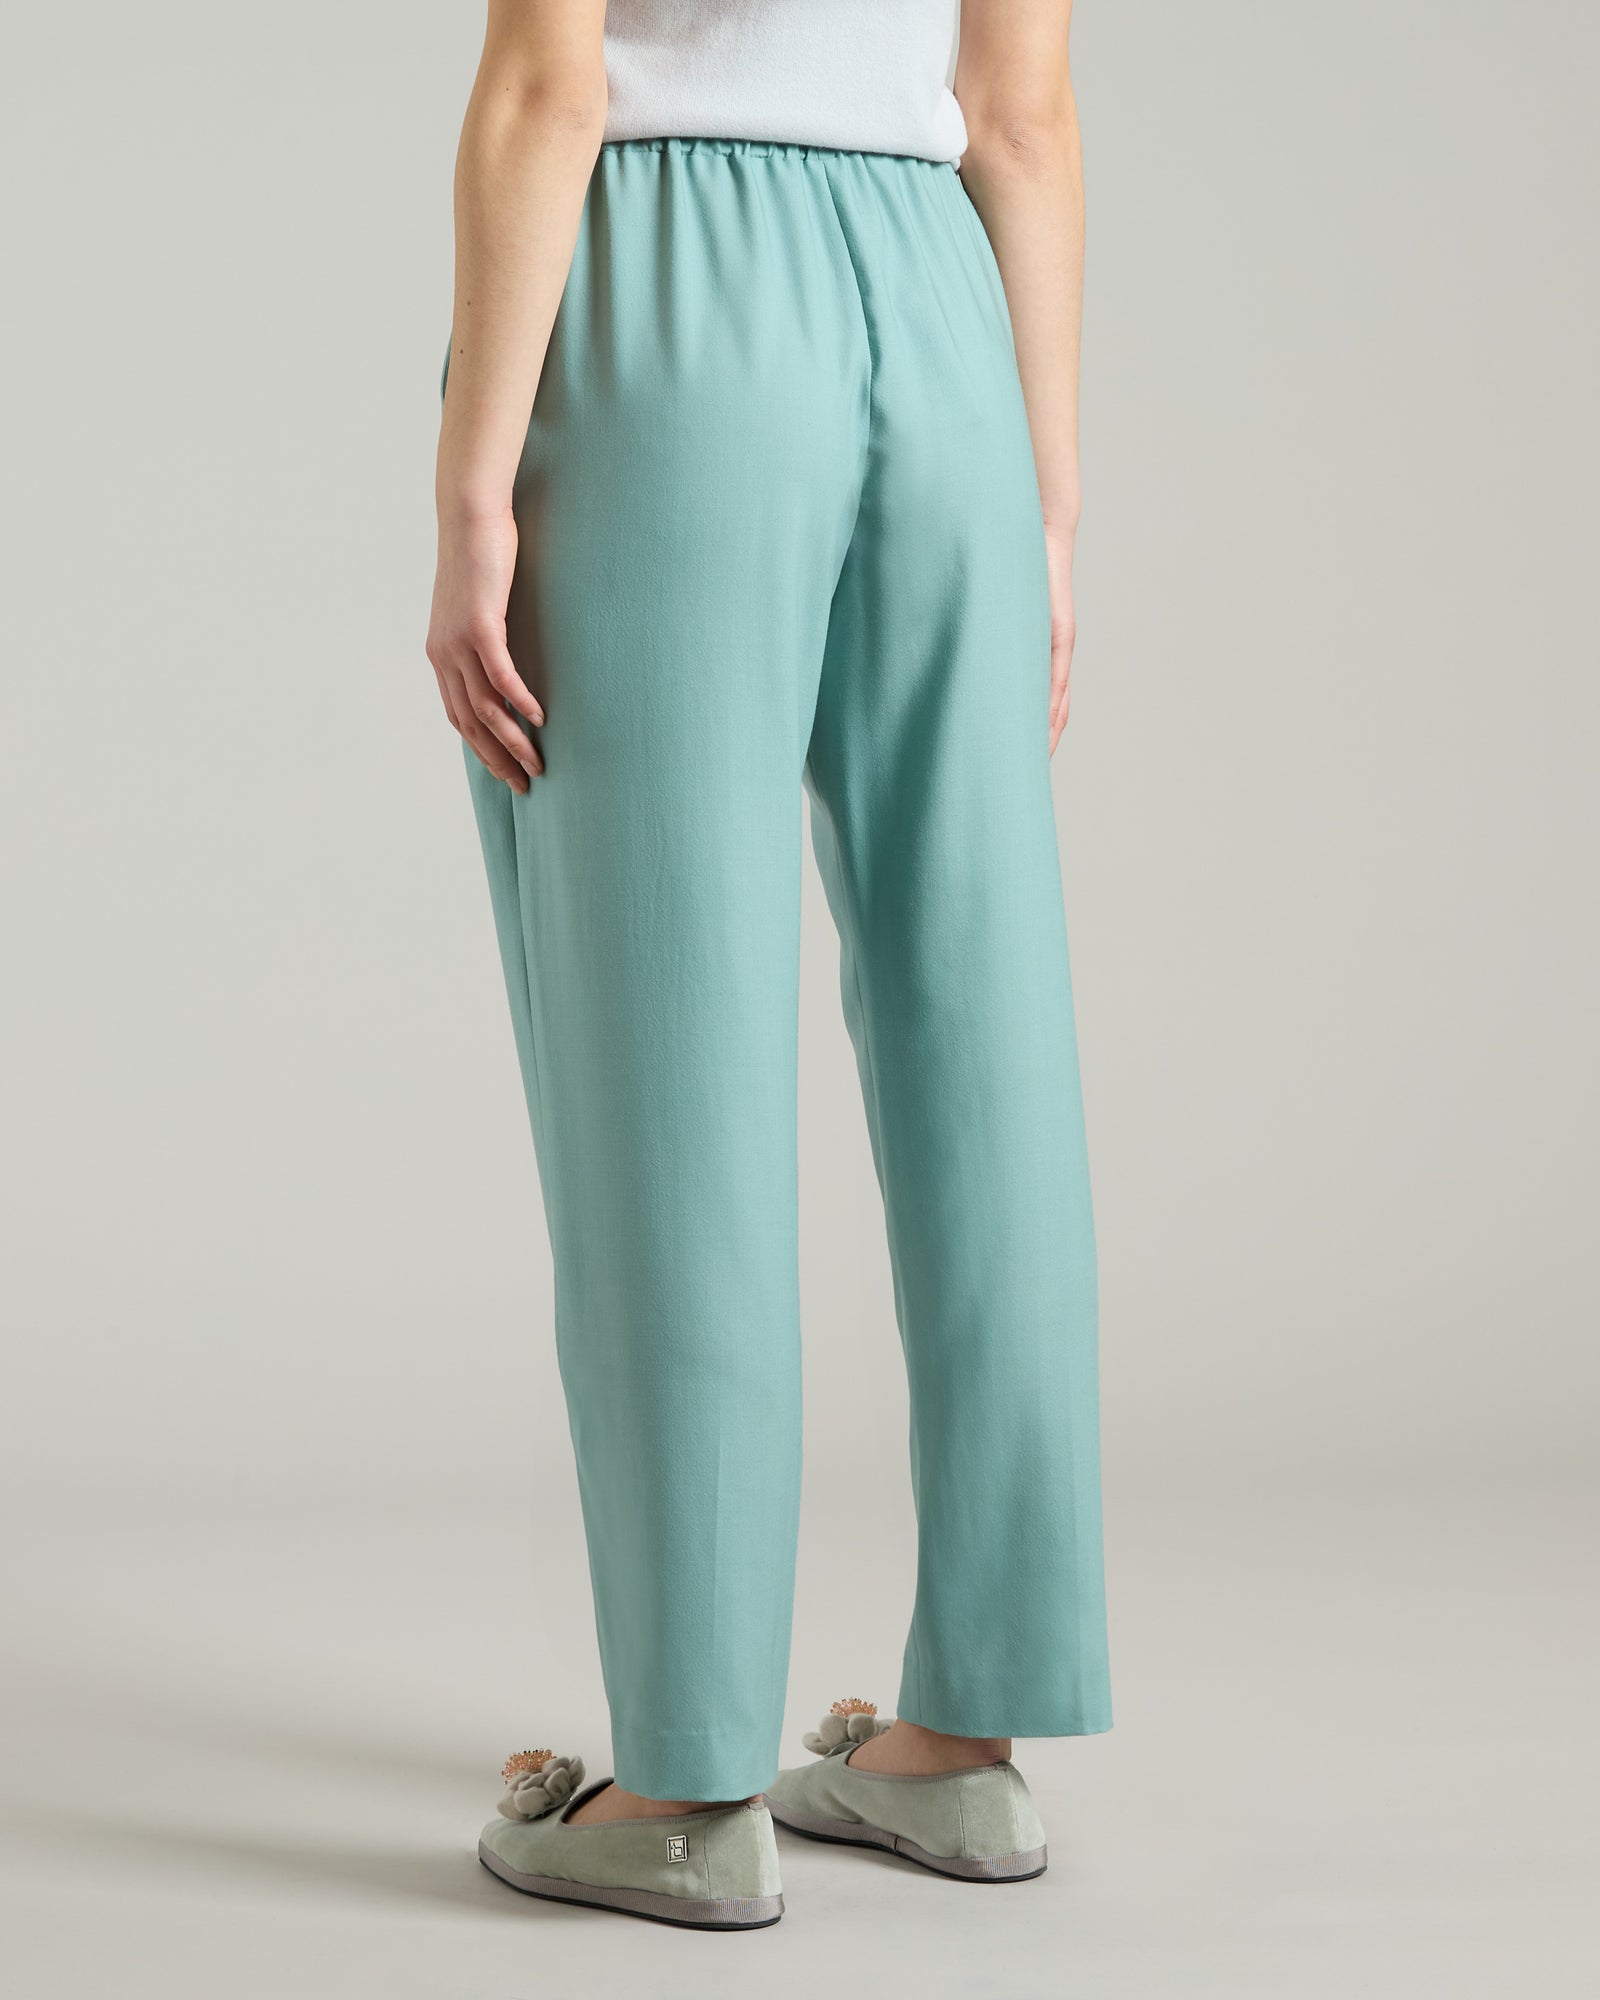 Green Cashmere 4.0 Pants